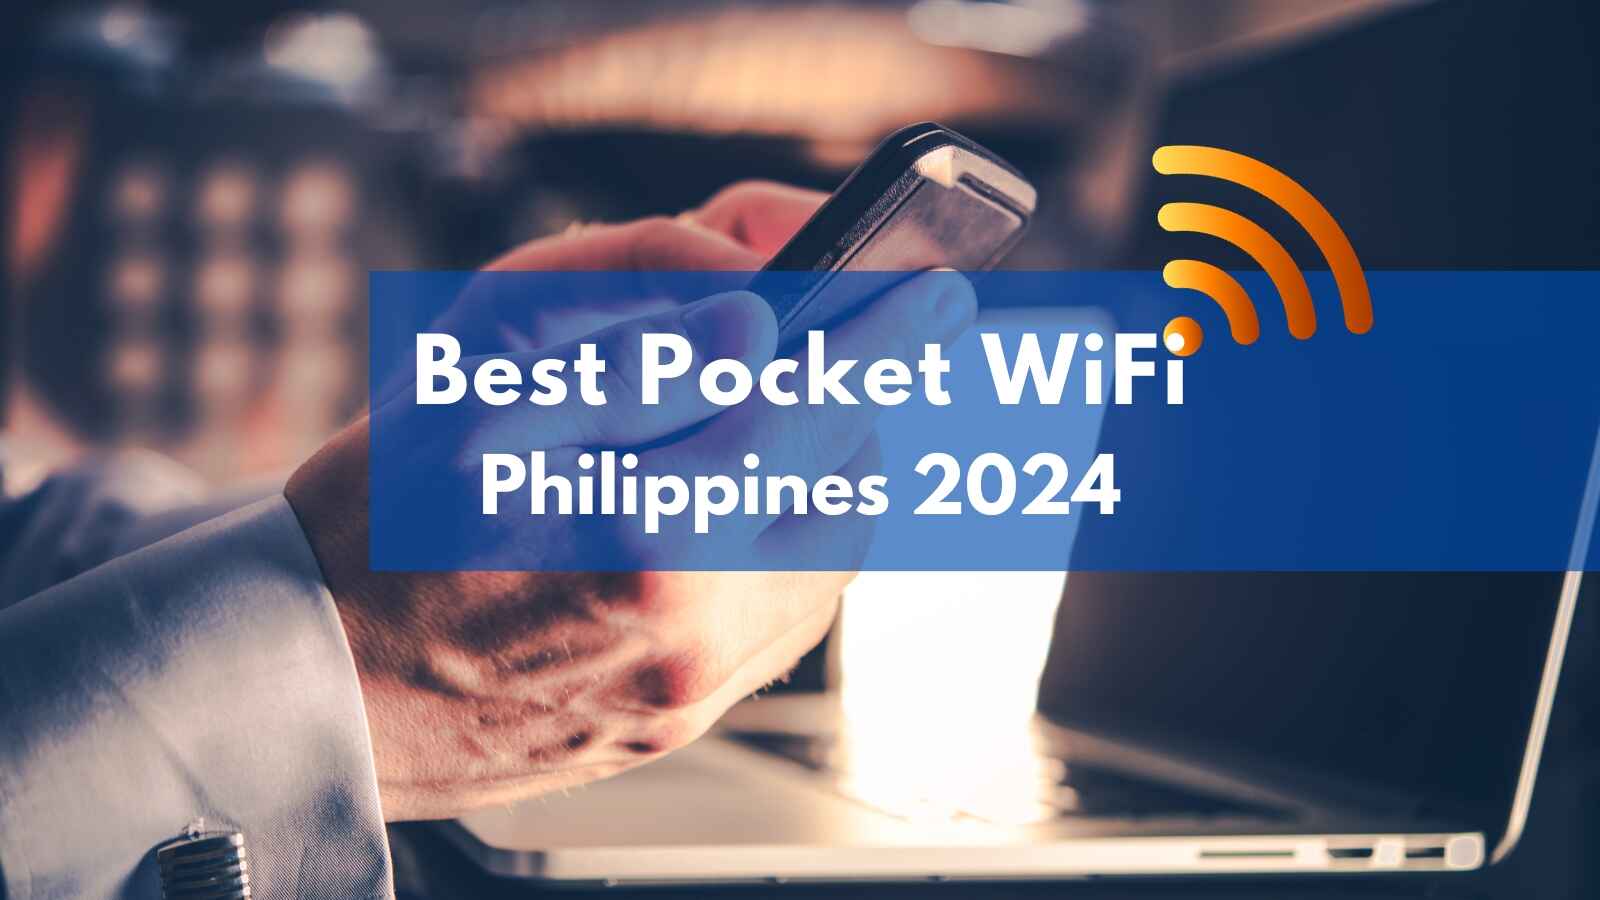 best pocket WiFi in the Philippines in 2024